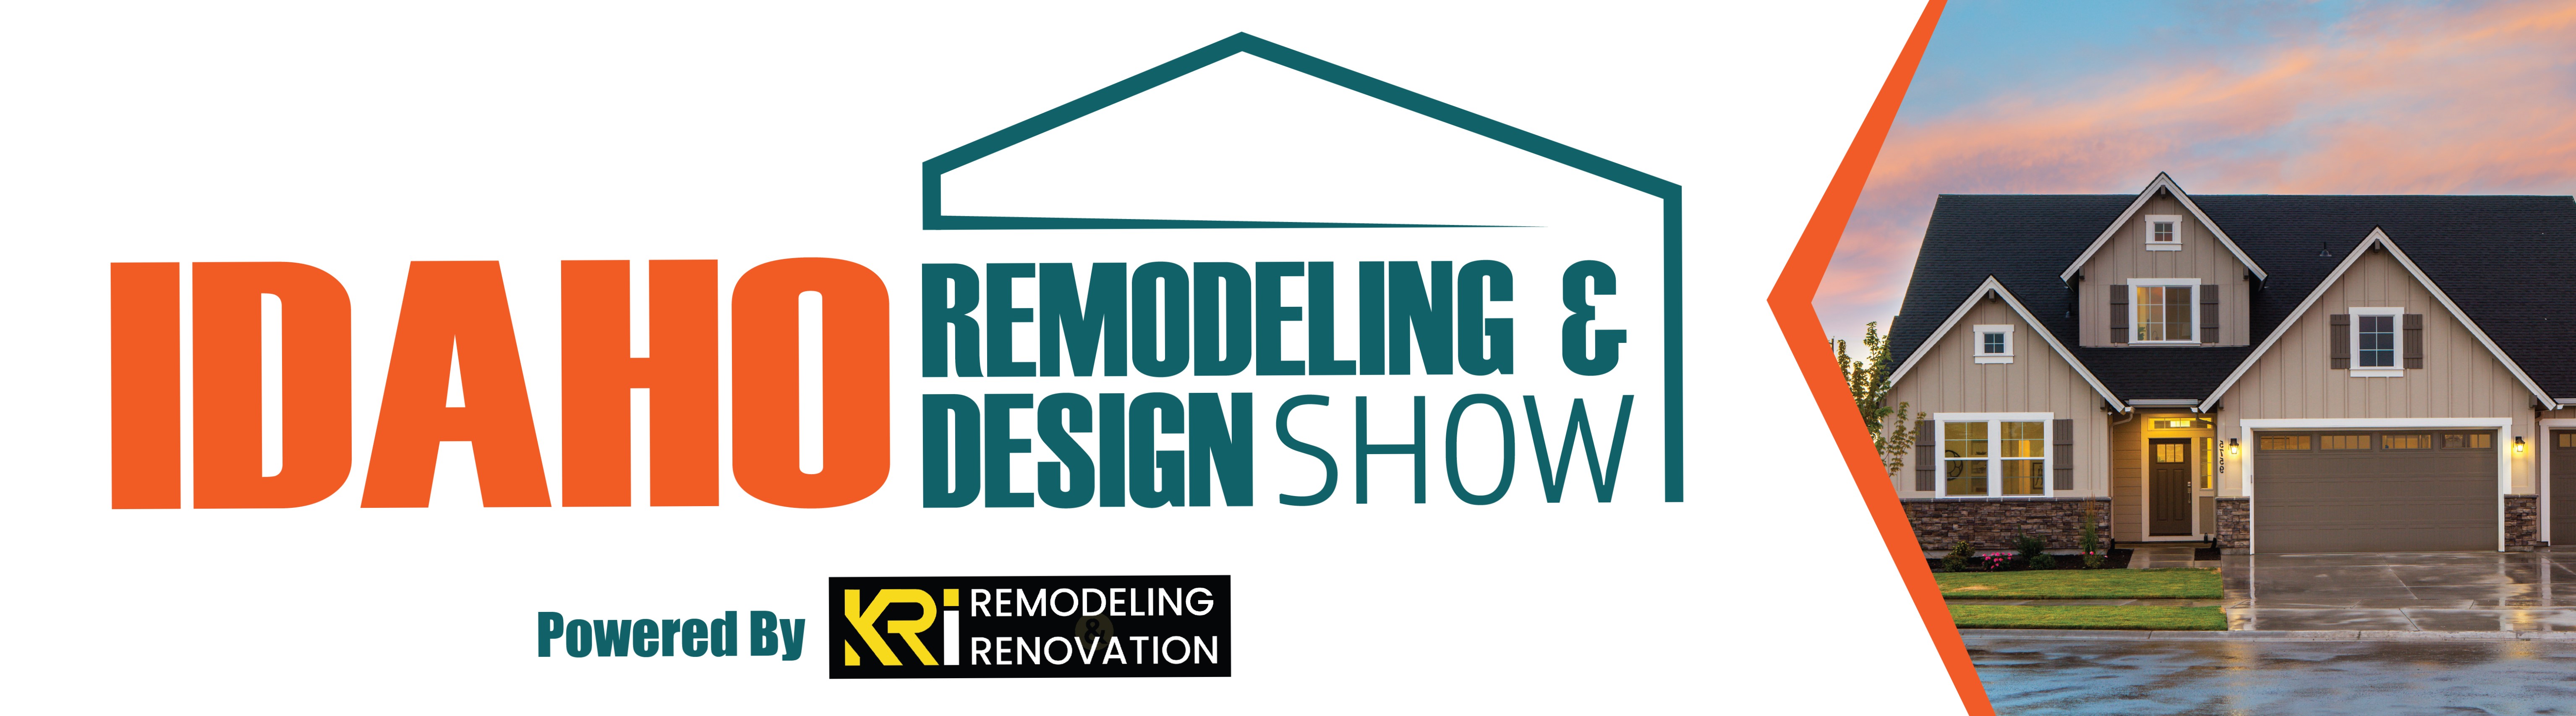 About Remodeling & Design Show